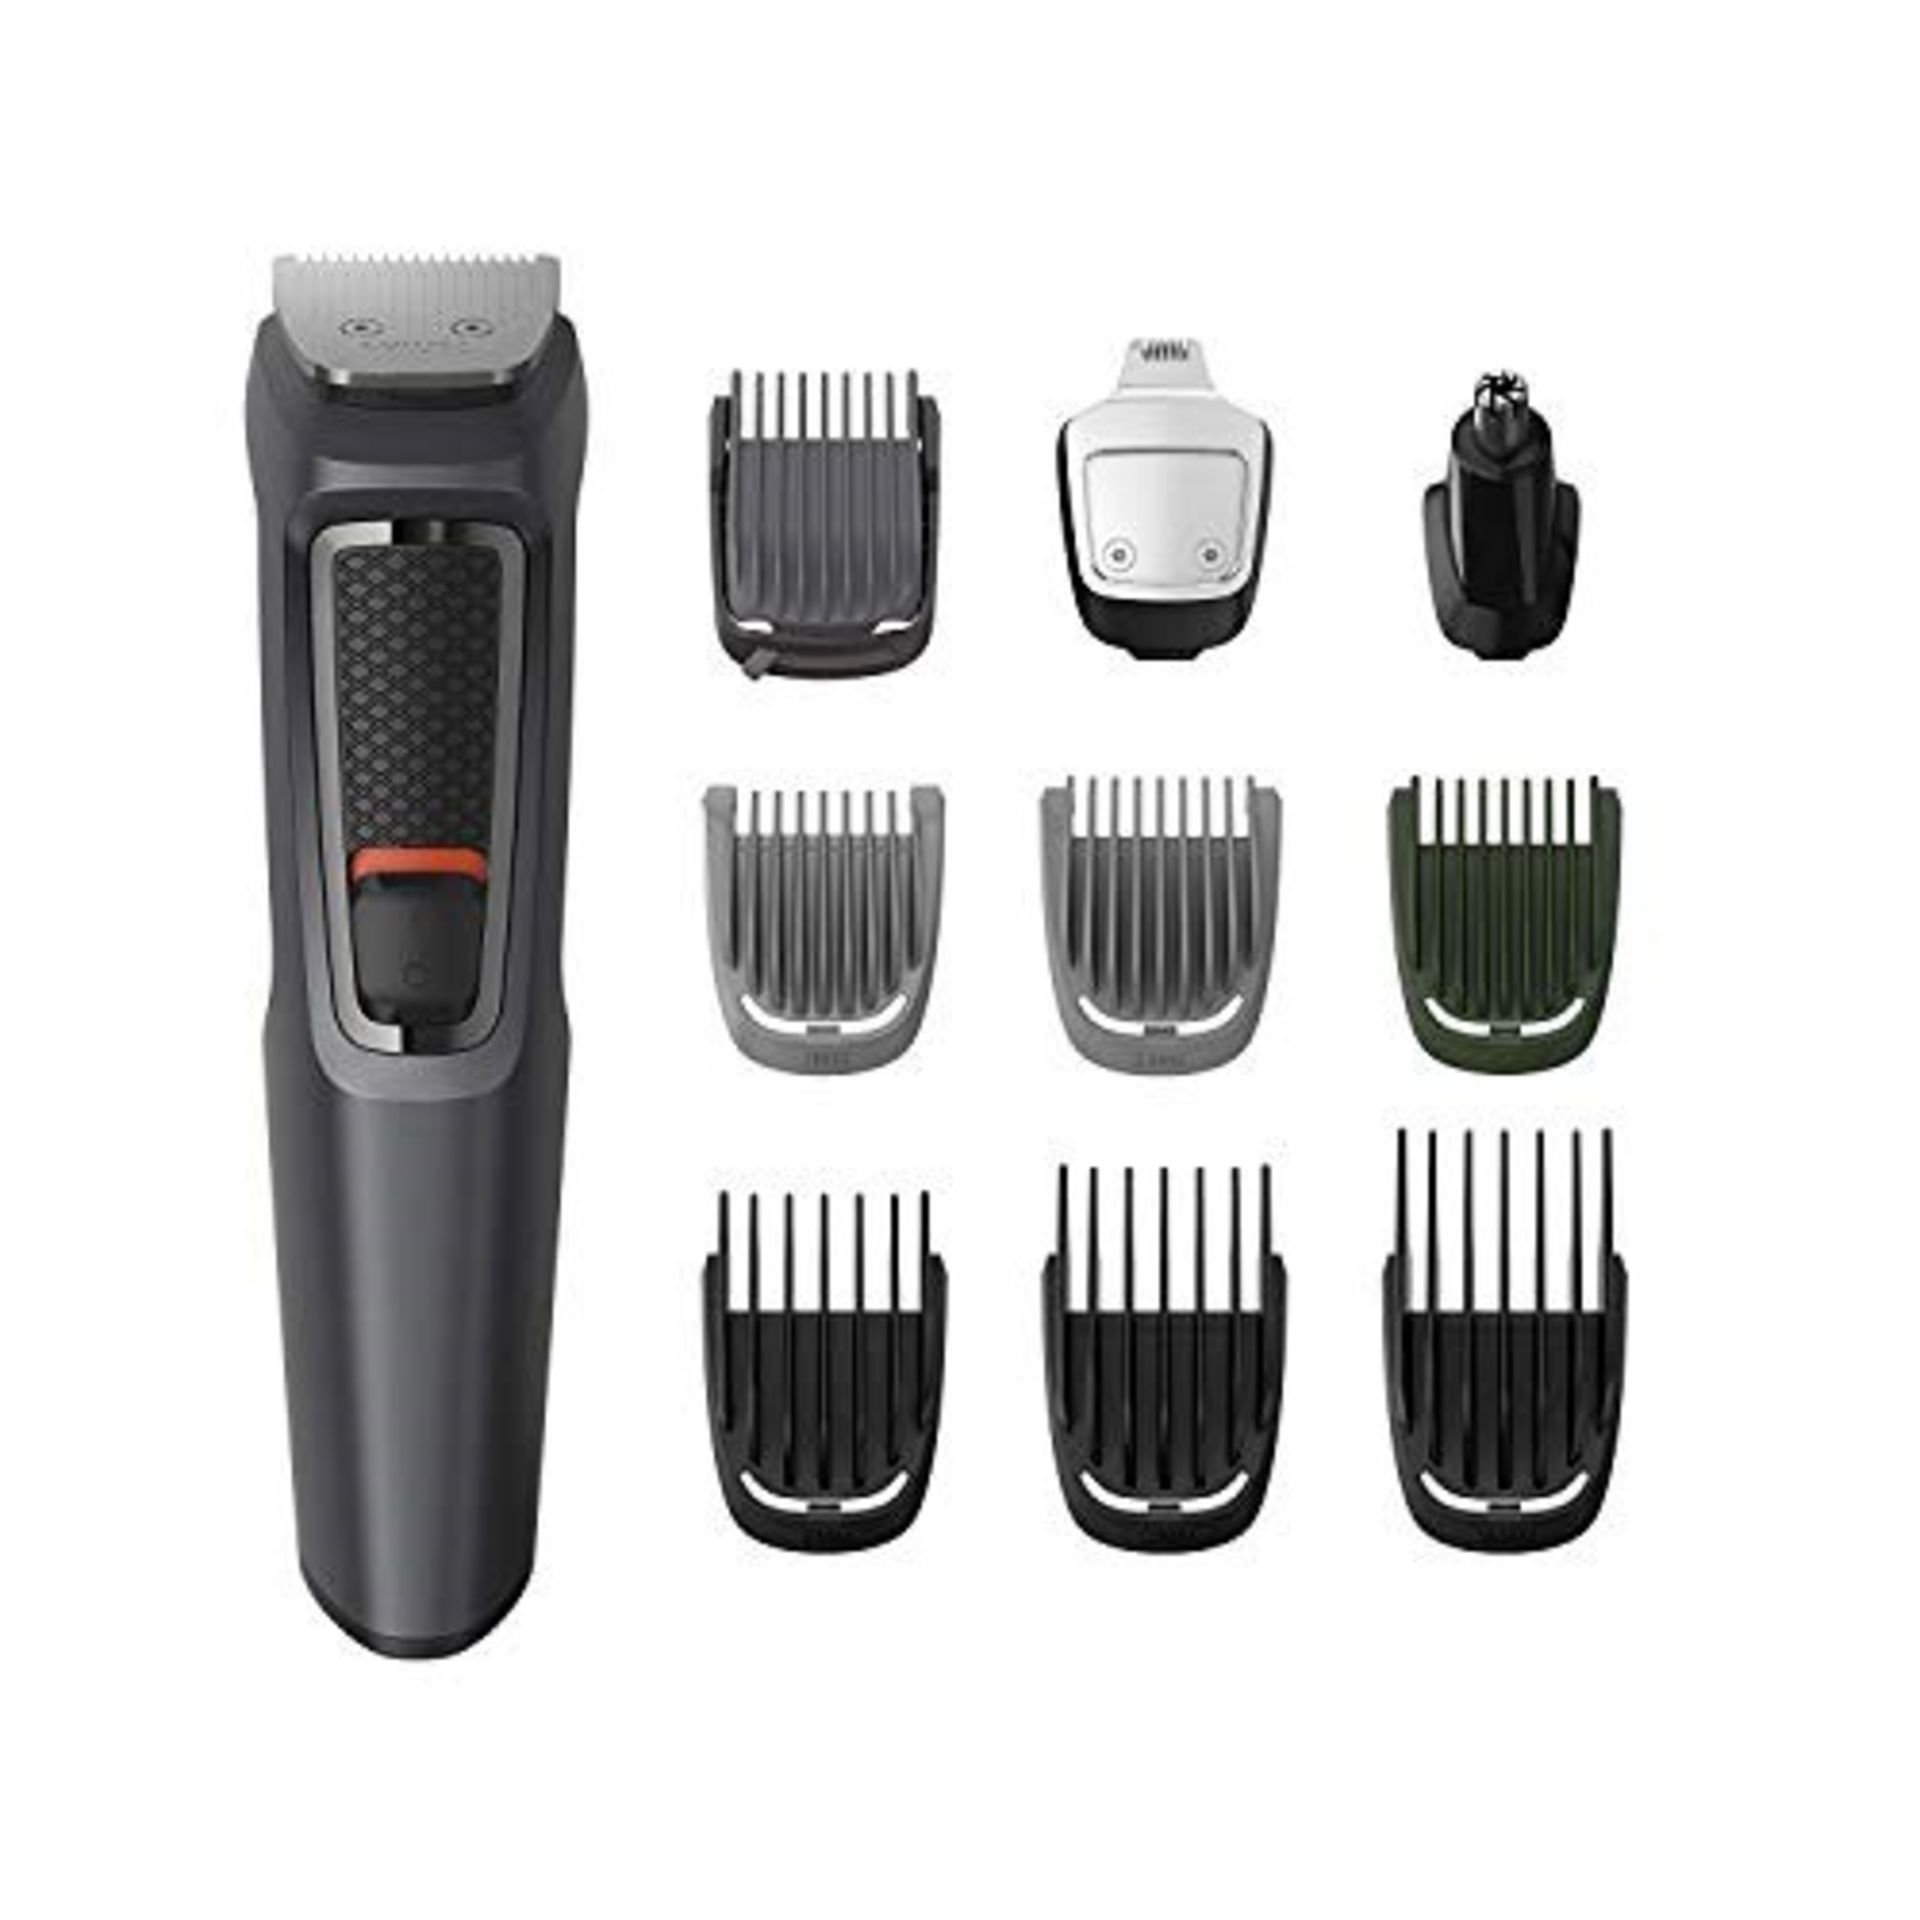 Philips 10-in-1 All-In-One Trimmer, Series 3000 Grooming Kit, Beard Trimmer, Hair Clip